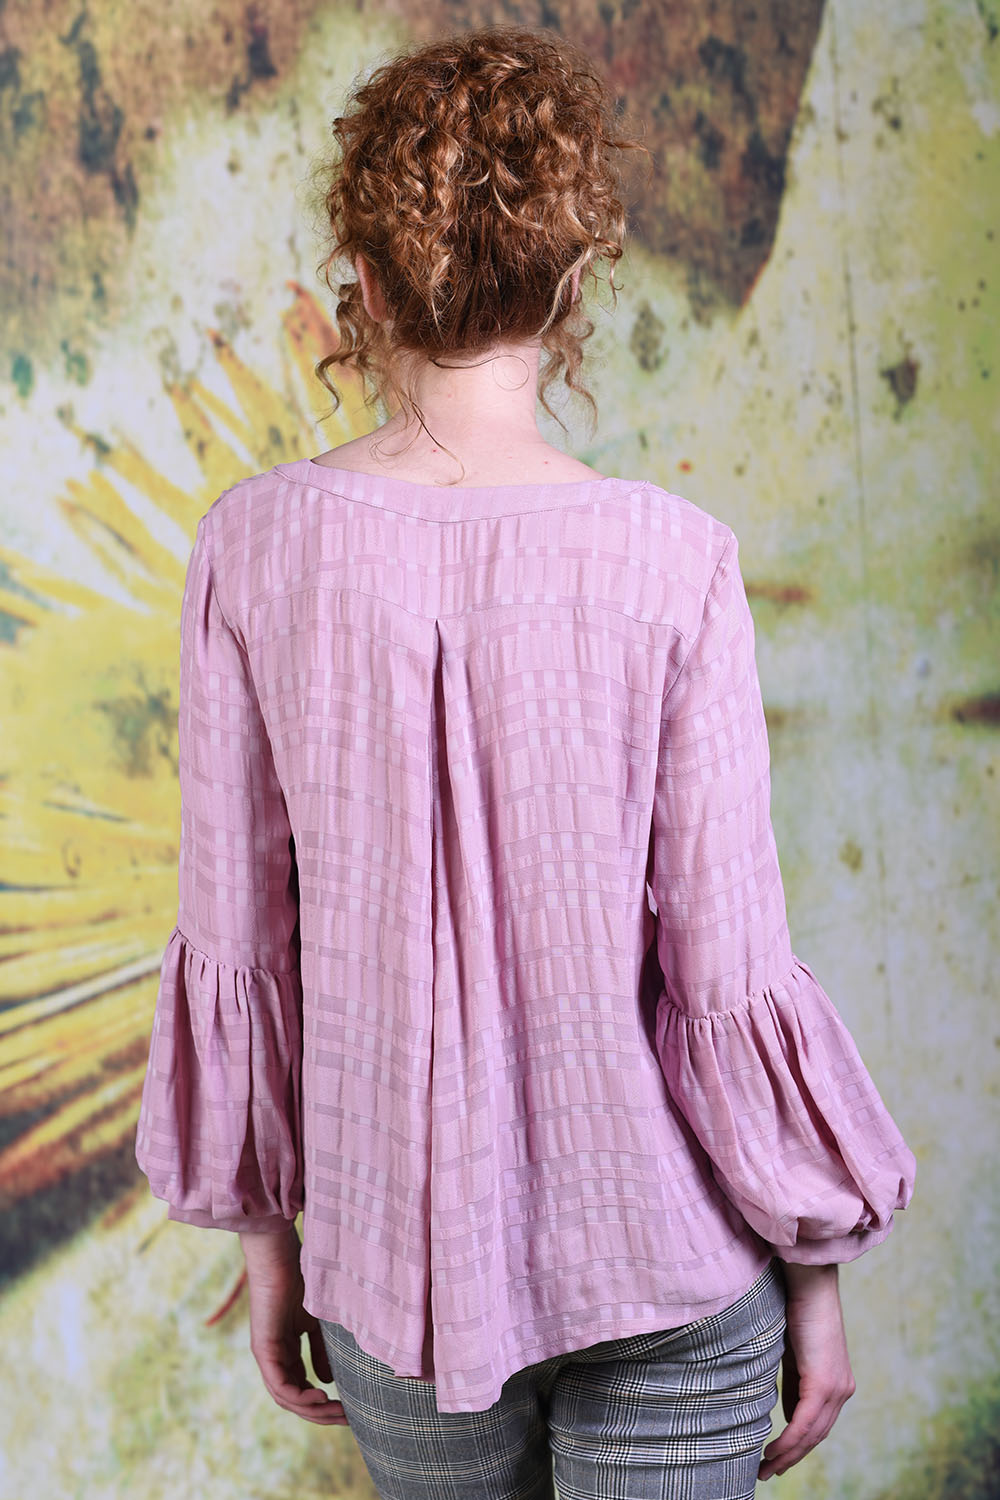 Back of model wearing the Annah Stretton Poison Ivy top in dusky pink